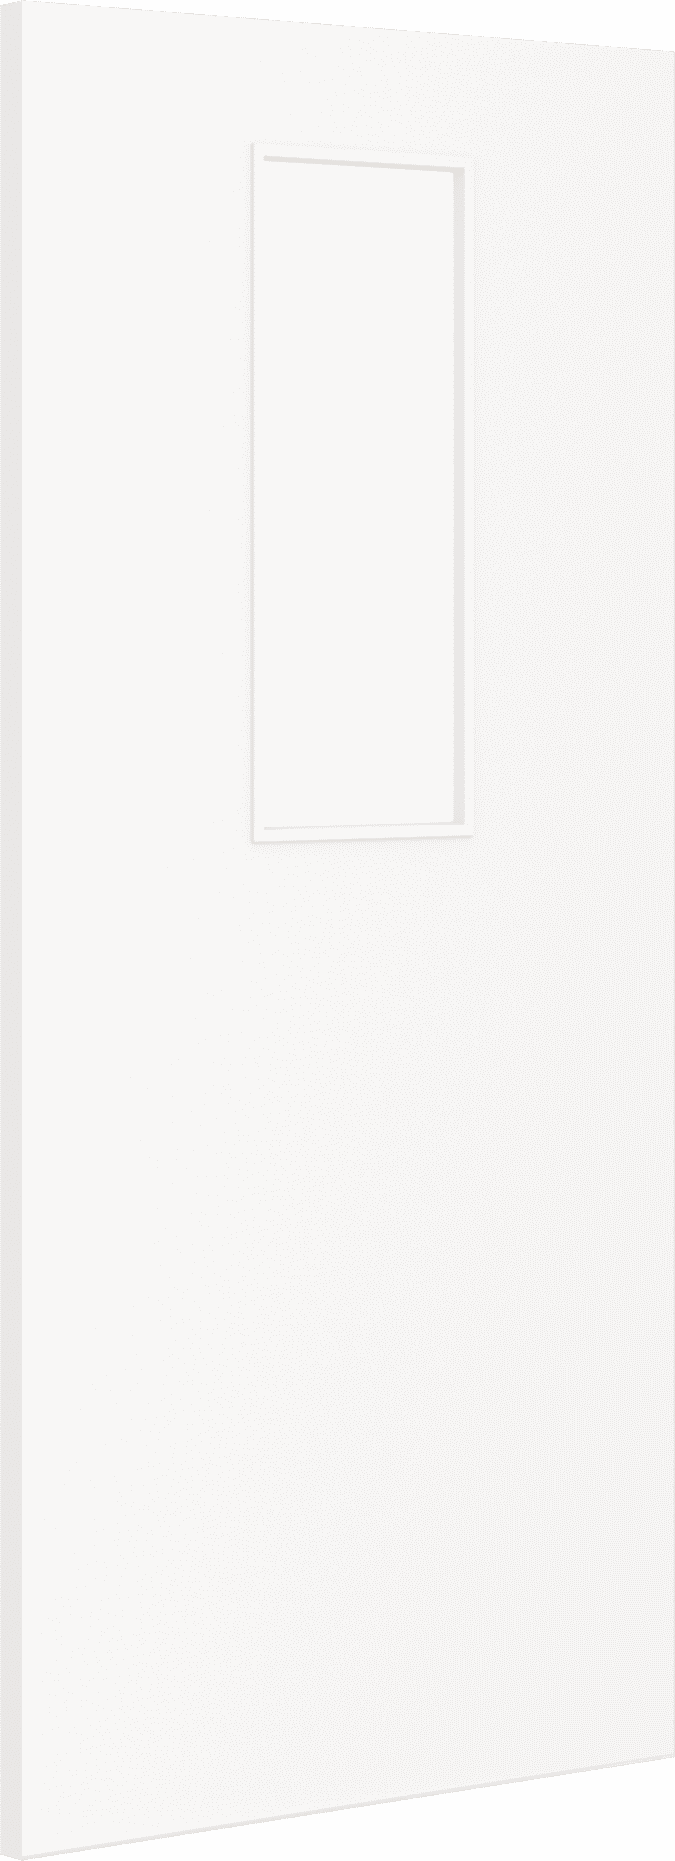 1981mm x 686mm x 44mm (27") Architectural Paint Grade White 14 Frosted Glazed Fire Door Blank